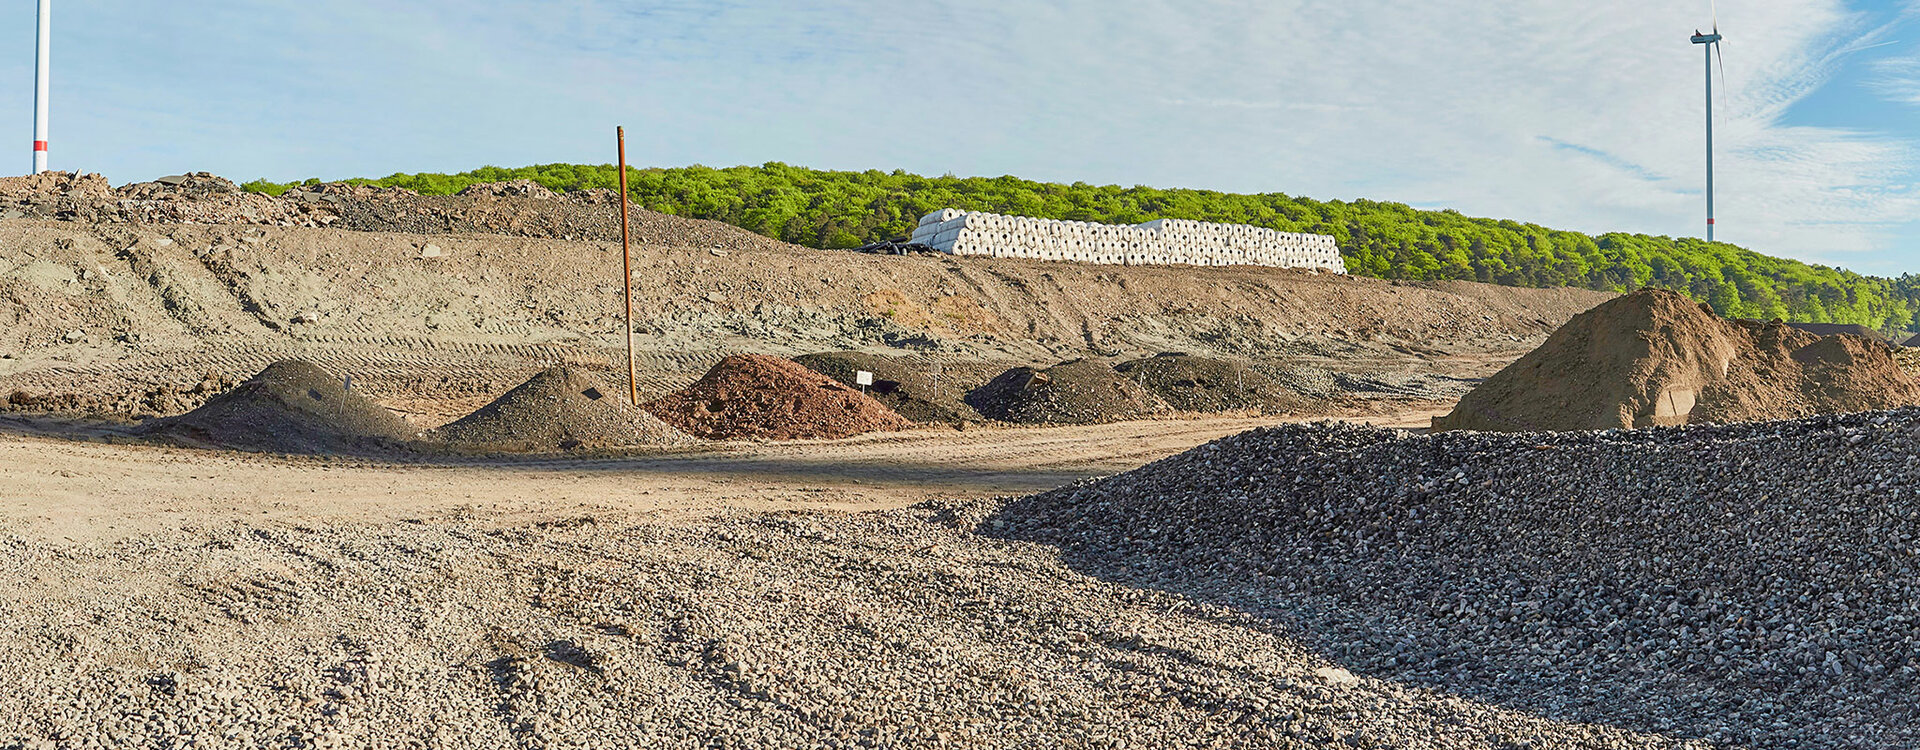 Landfill construction materials from mineral waste